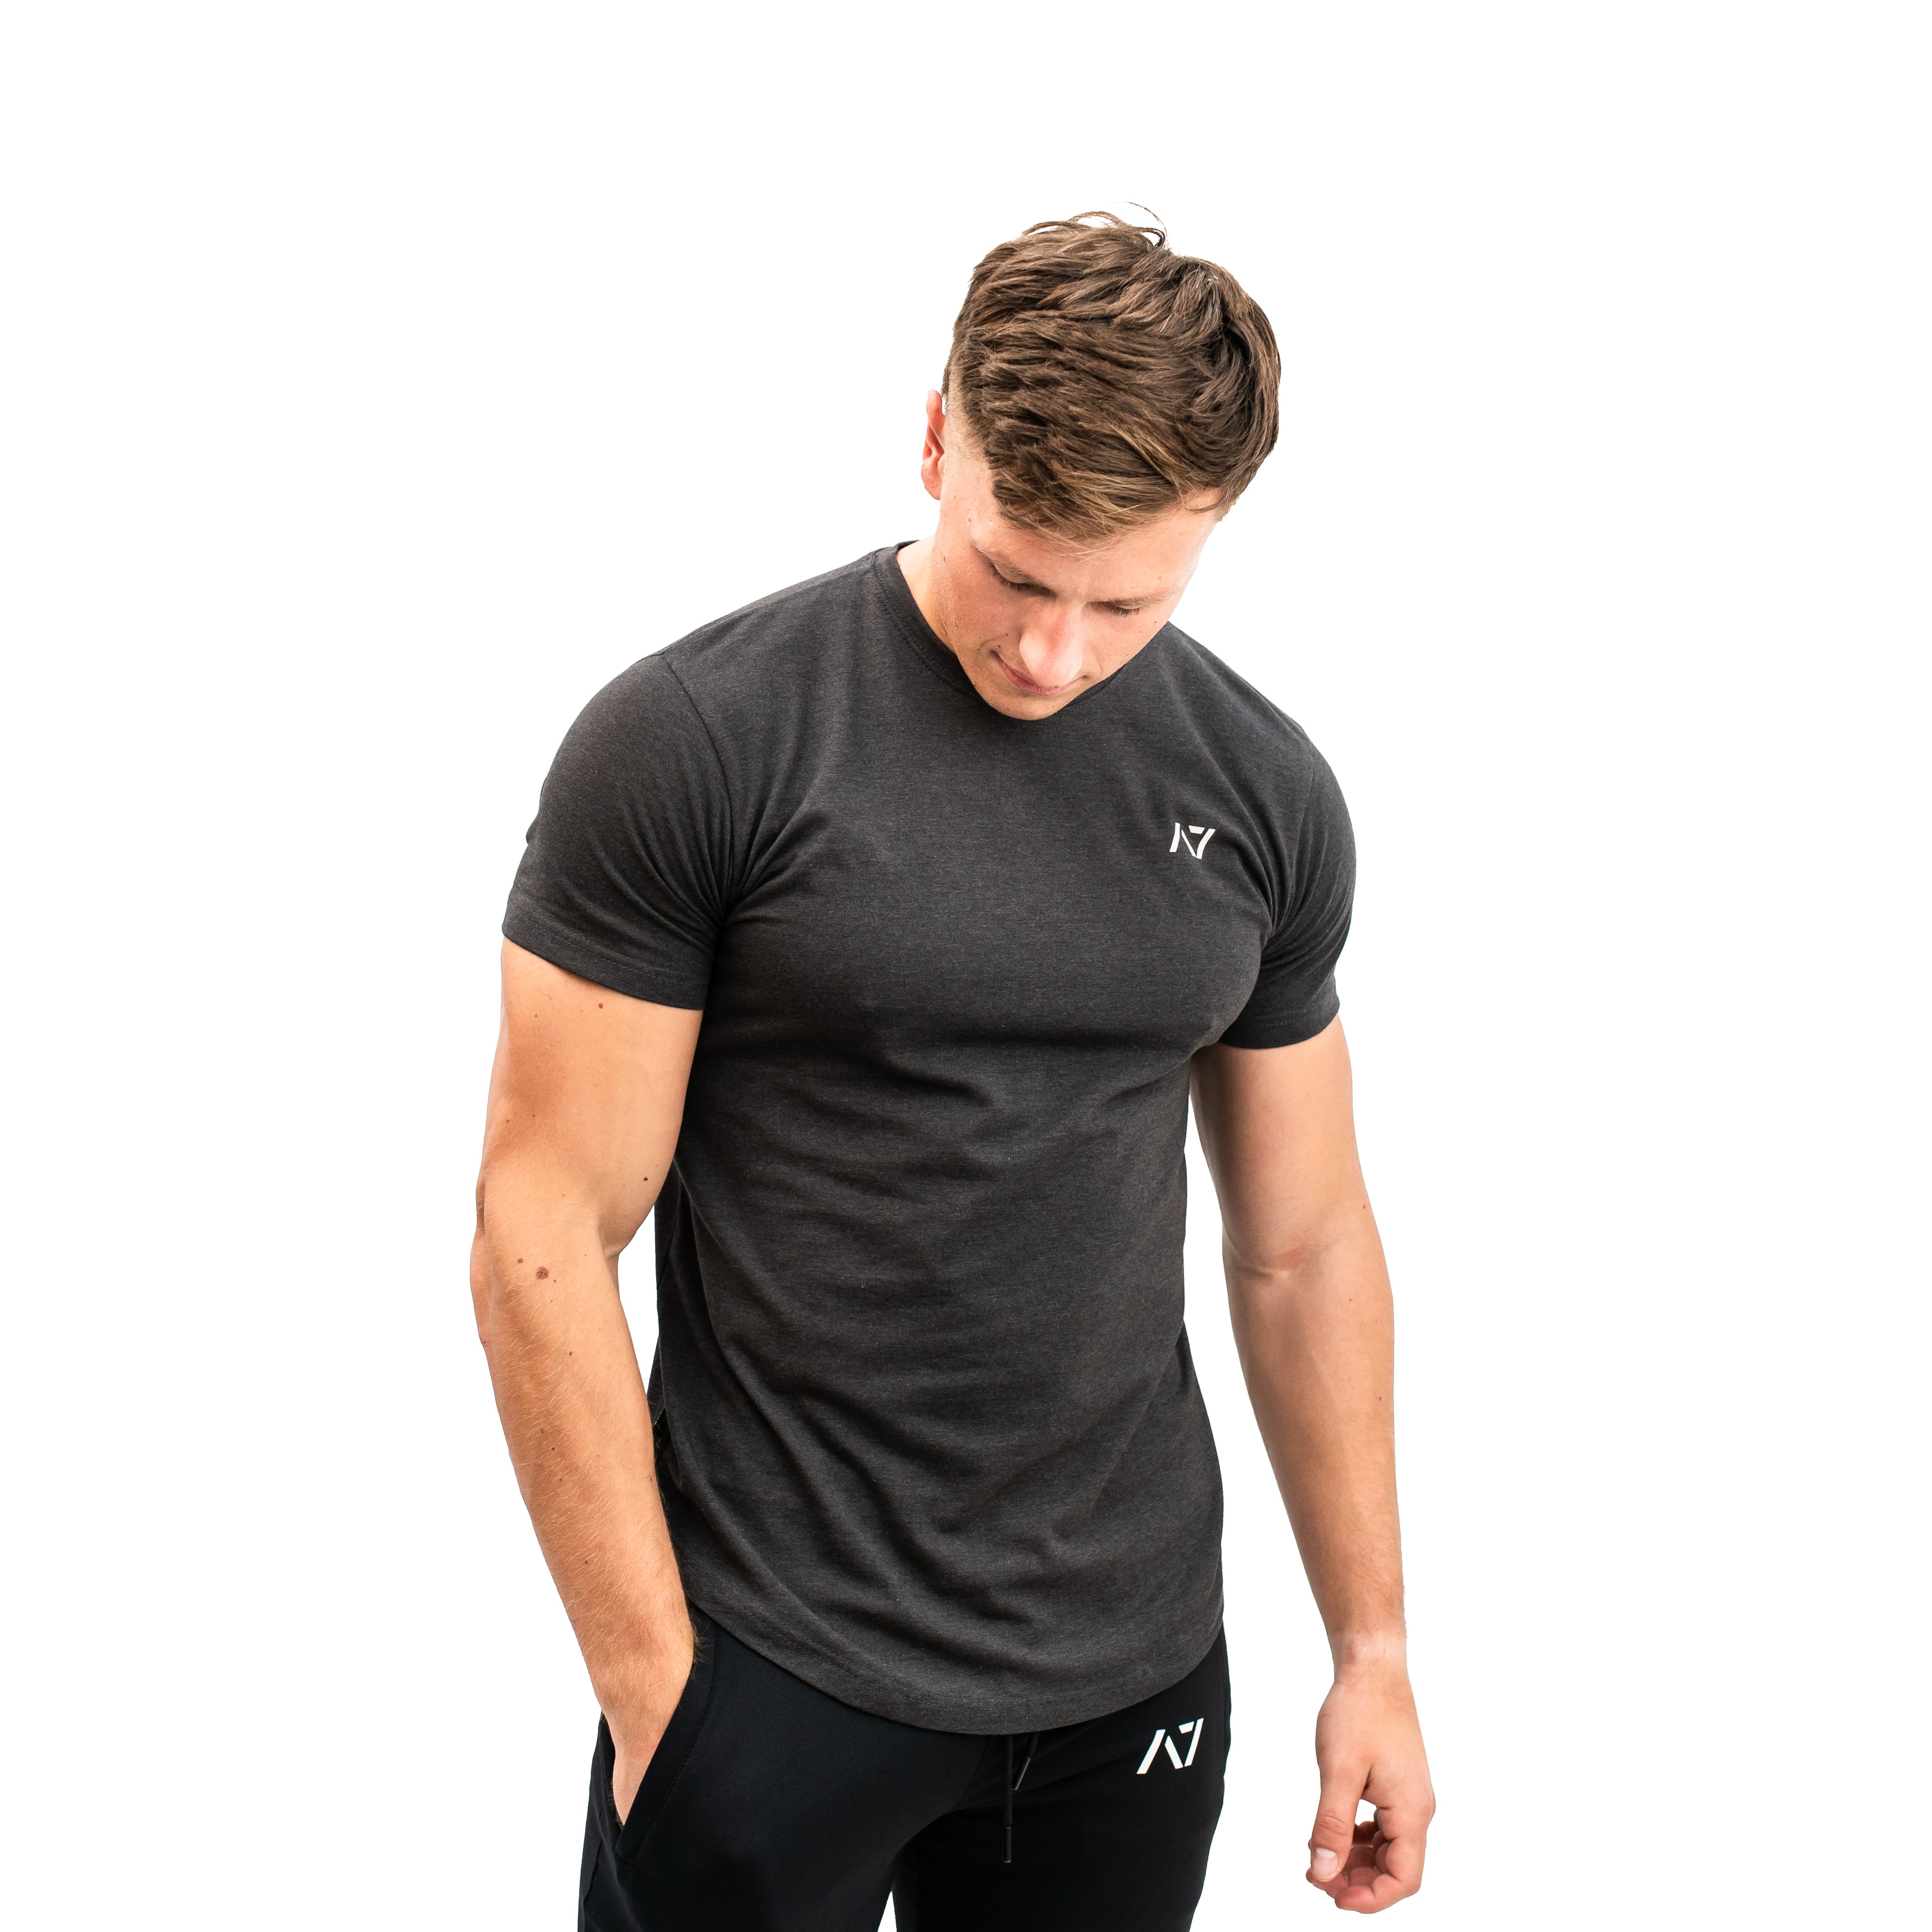 The A7 balance collection which combines comfort and aesthetics. The pieces in this collection are made with comfortable fabrics and minimal logos to create a simple, yet impactful look. The Balance shirts are made with a high quality polyester cotton spandex material. Balance shirts are great for in and out the gym Purchase A7 Balance Shirt from A7 Europe. Purchase A7 Balance Shirt from A7 UK. Available in UK and Europe including France, Italy, Germany, the Netherlands, Sweden and Poland.